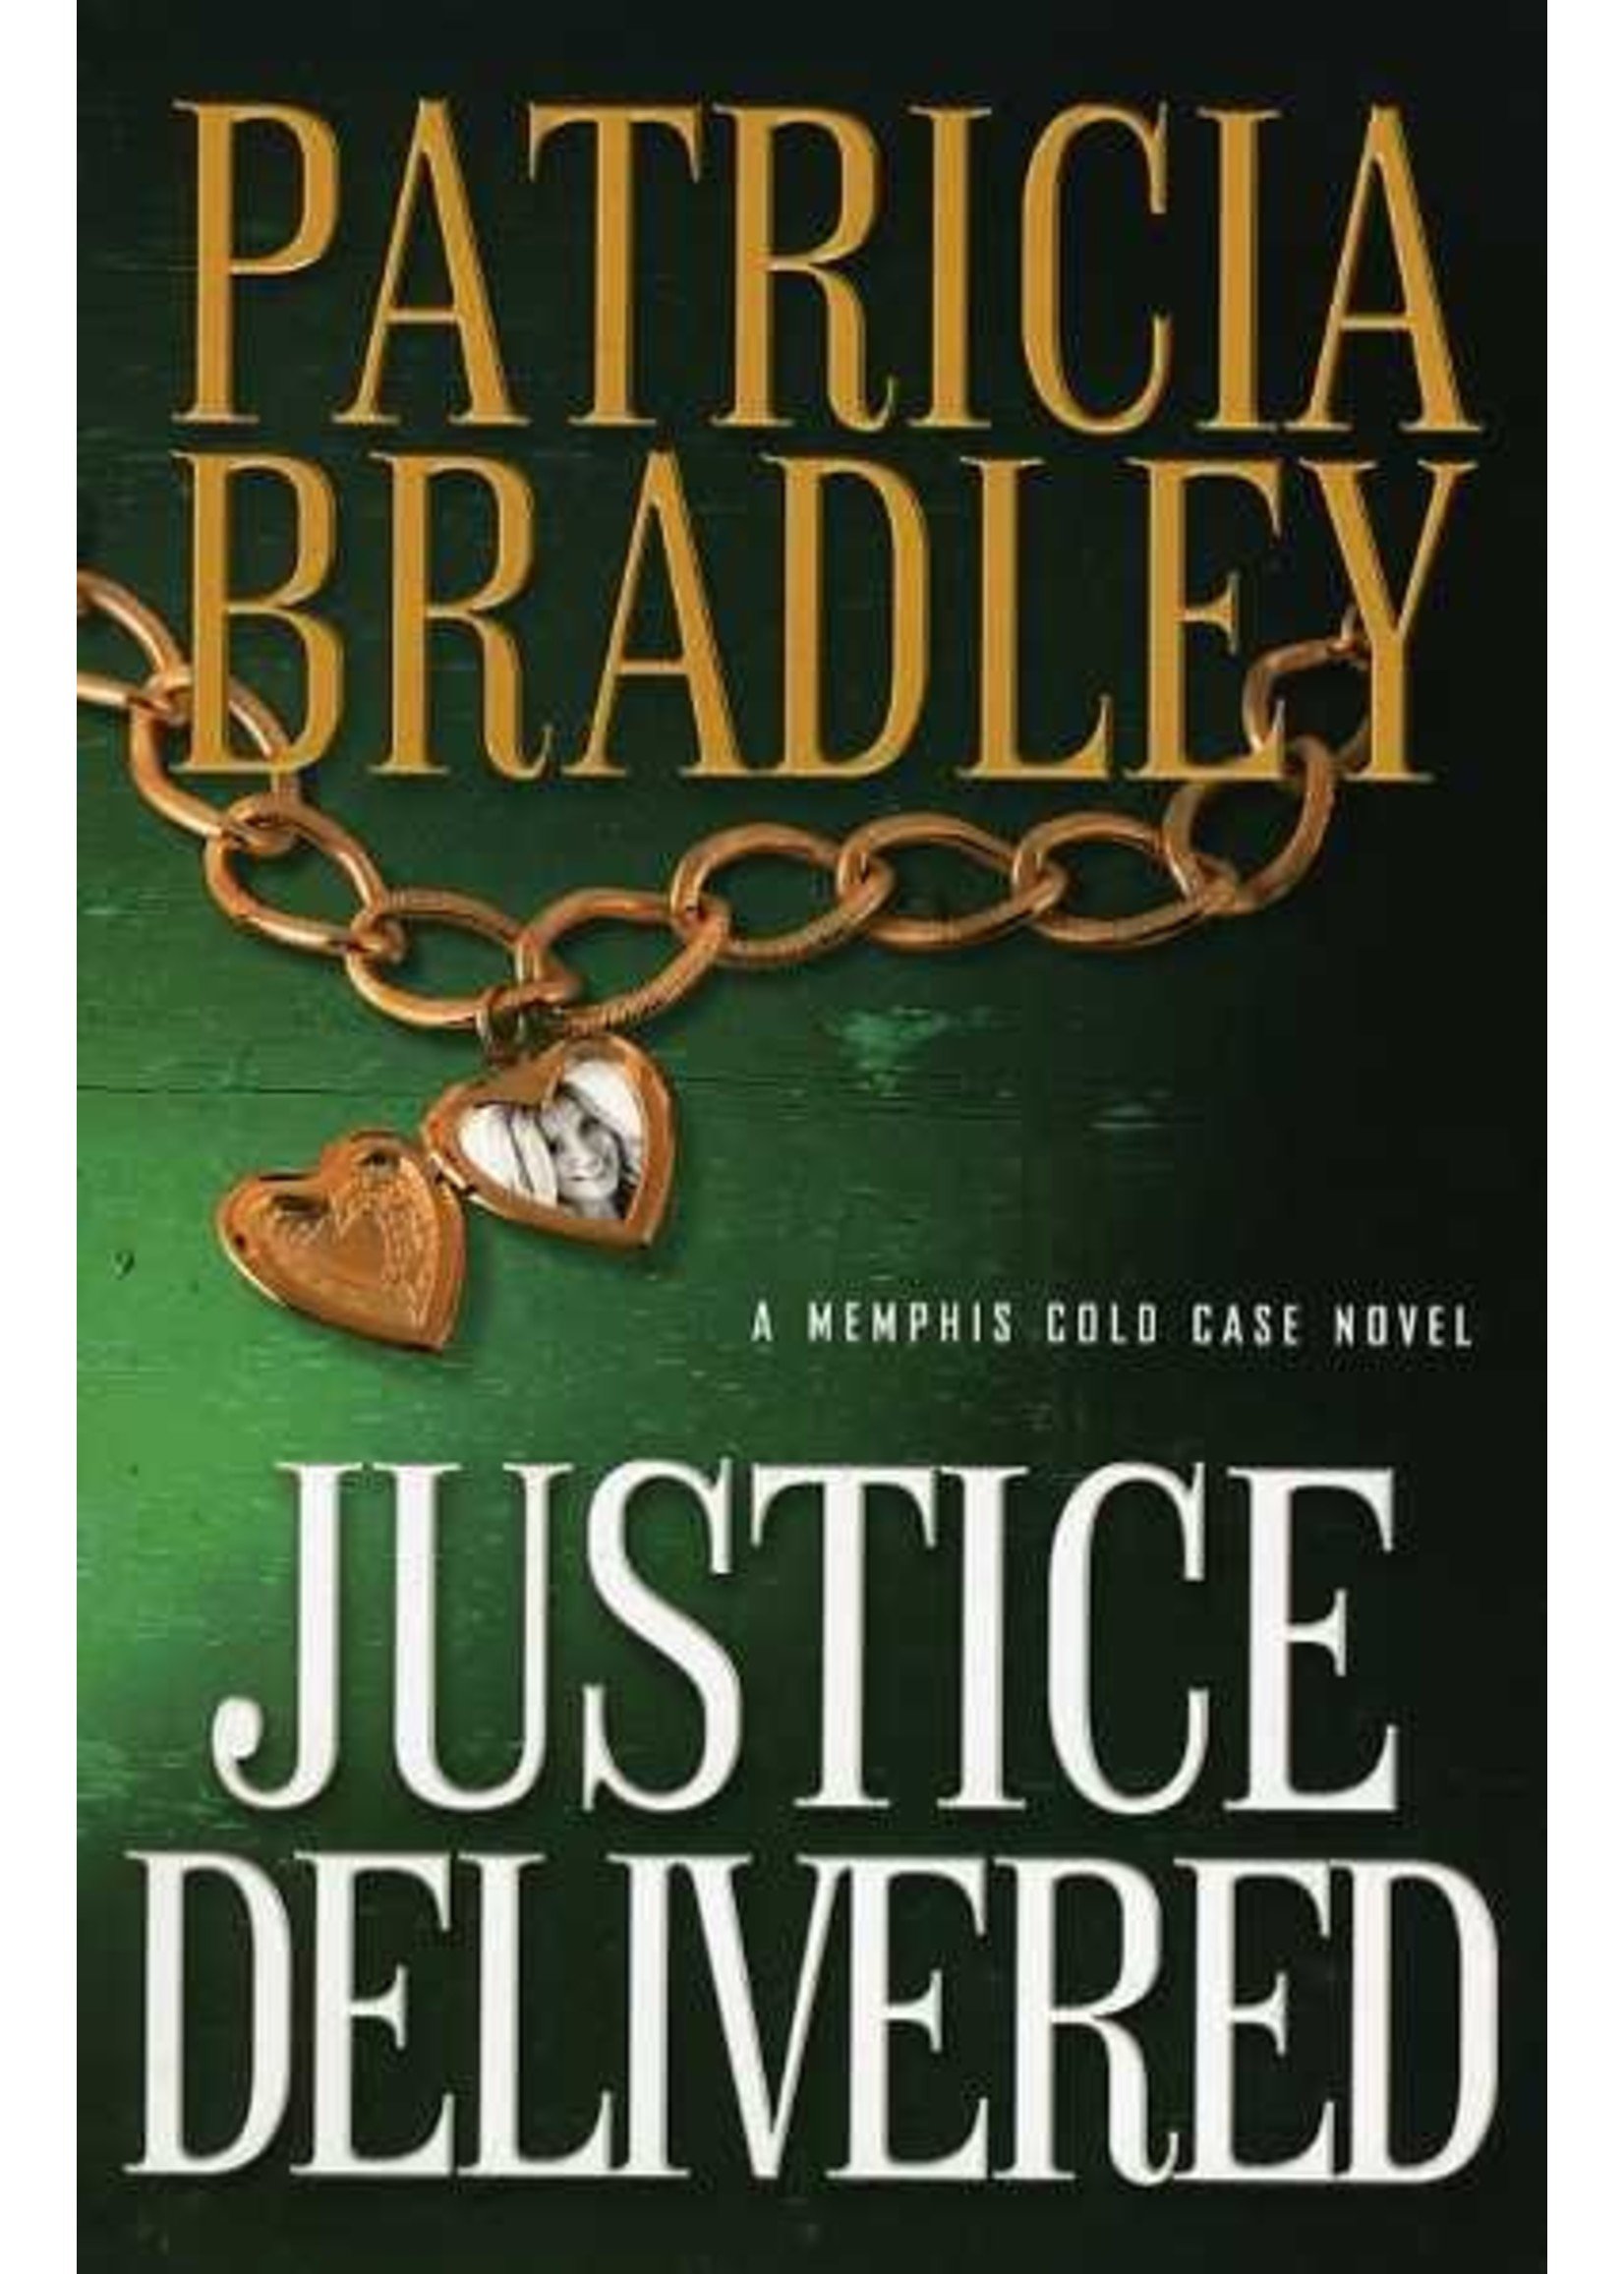 Revell Justice Delivered (Memphis Cold Case 4) - Patricia Bradley